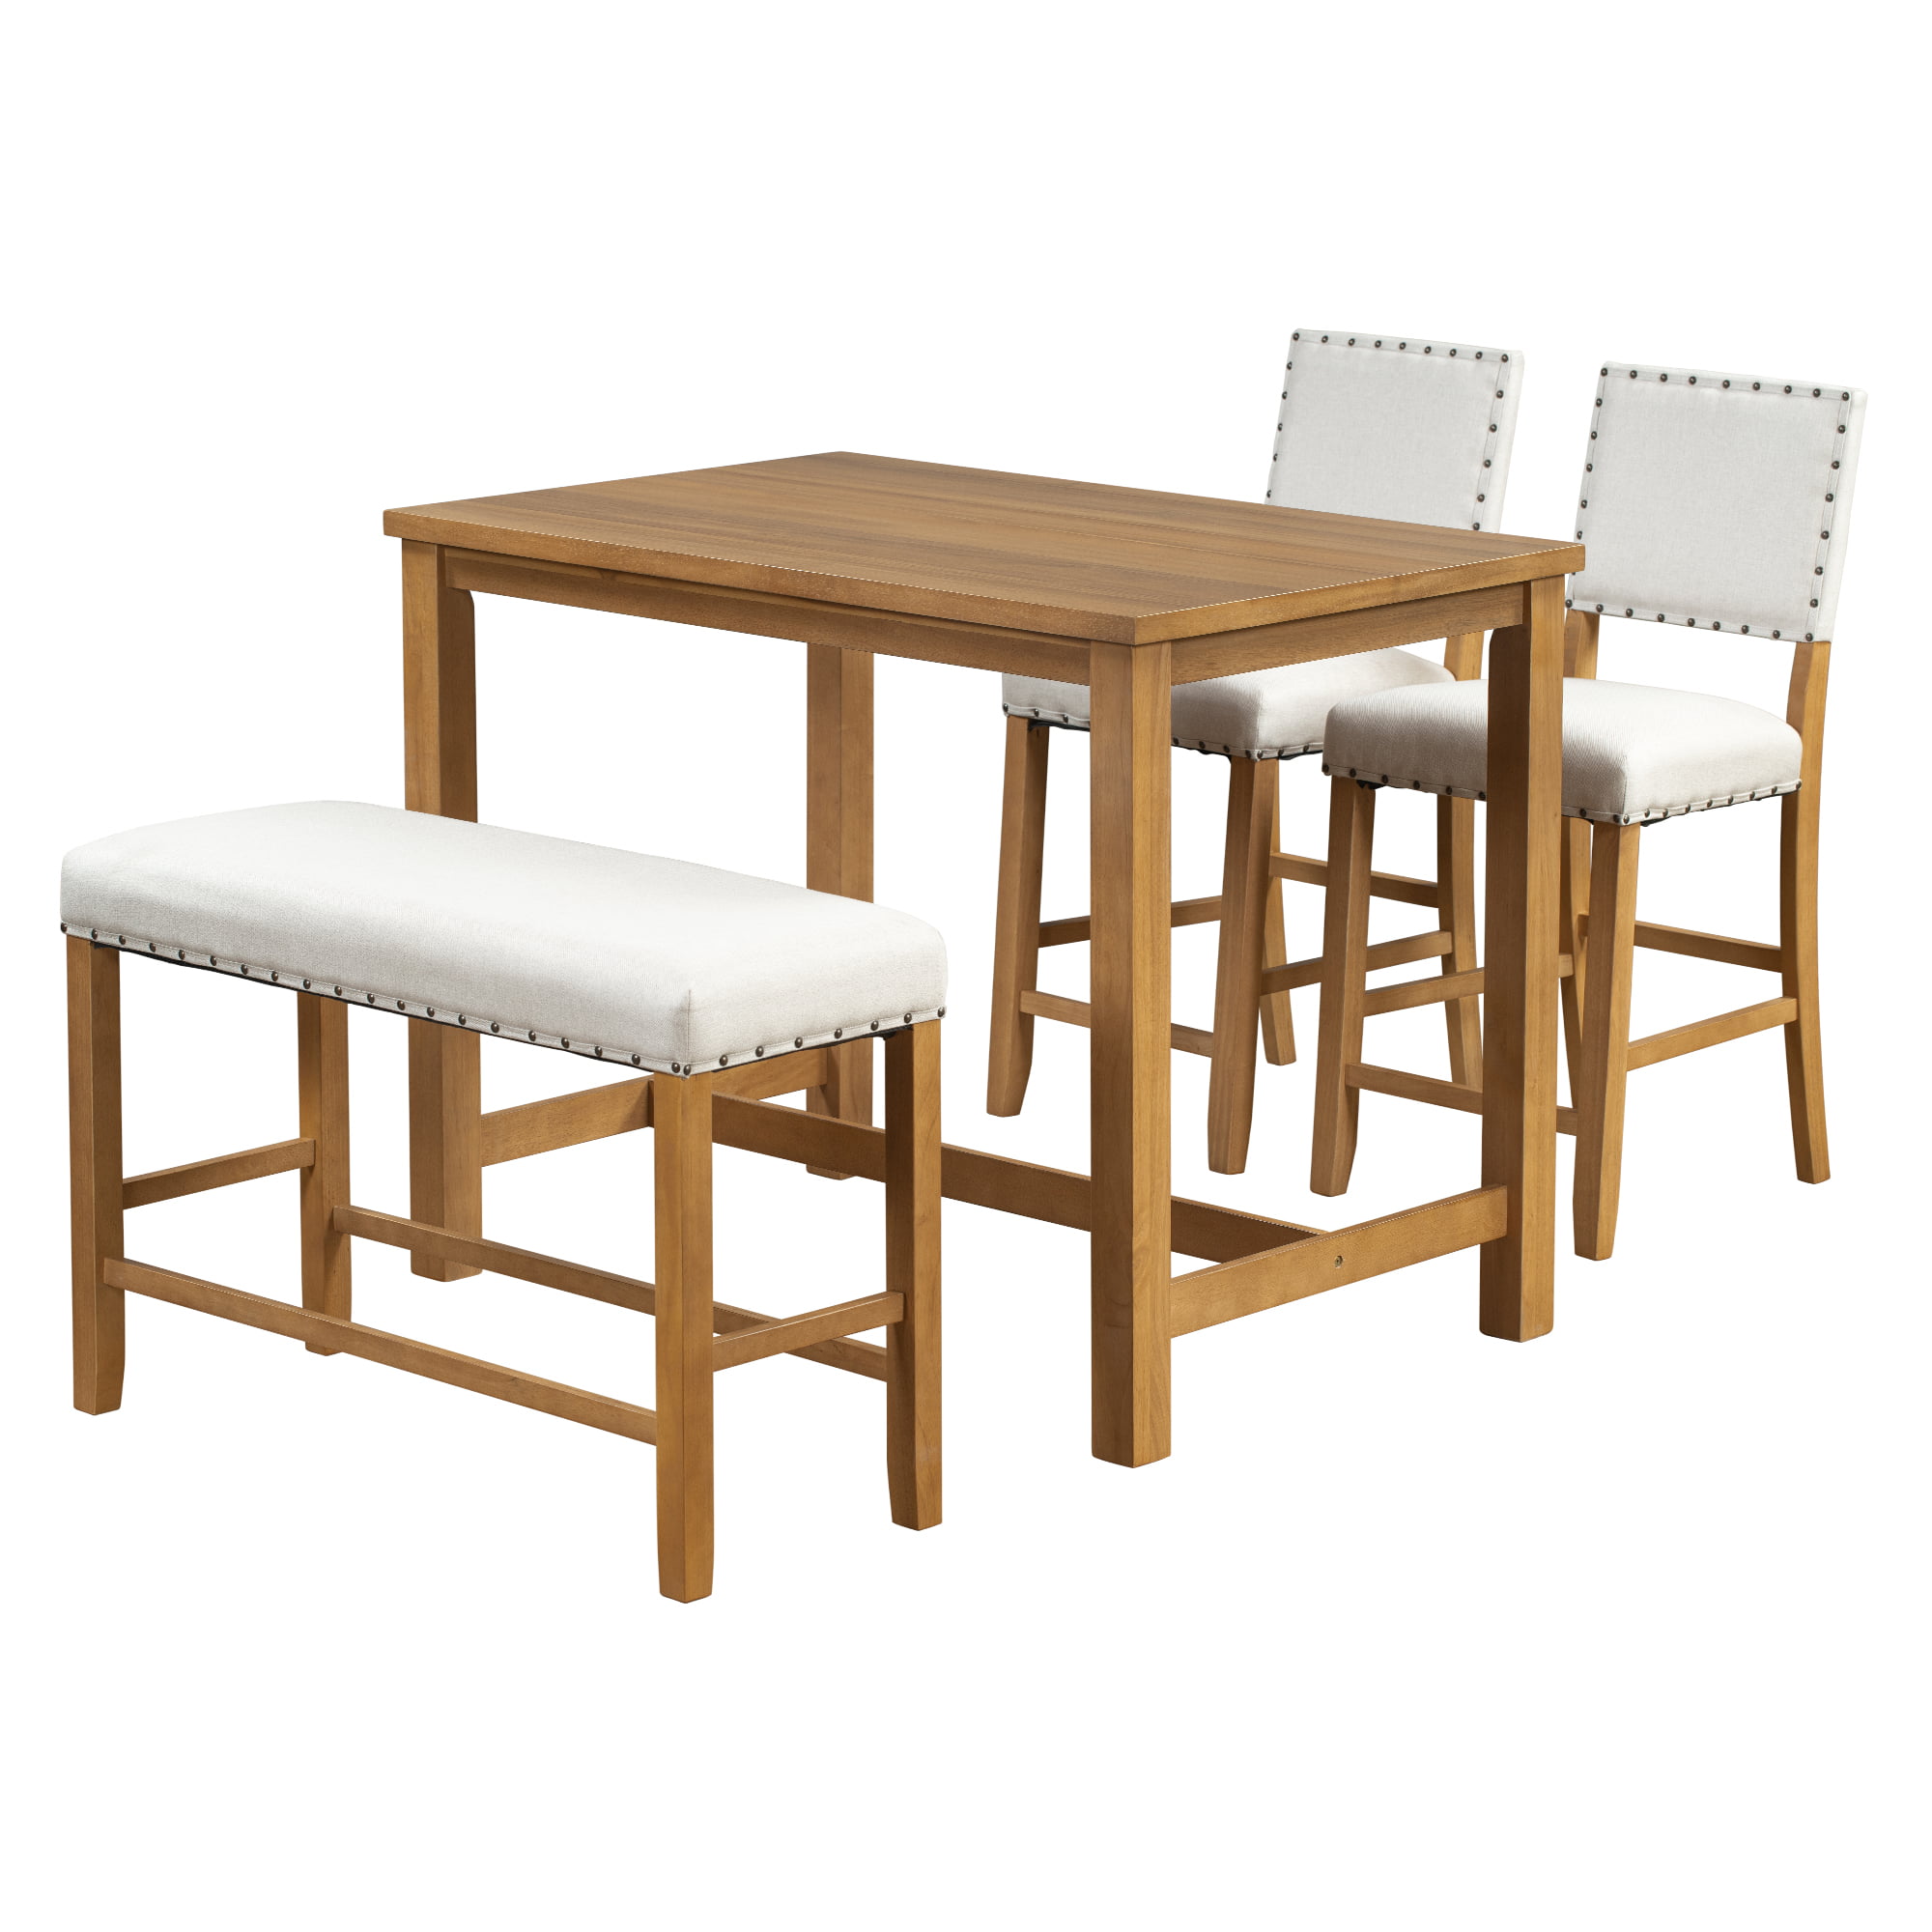 4 Piece Rustic Wooden Counter Height Dining Table Set - SH000157AAD